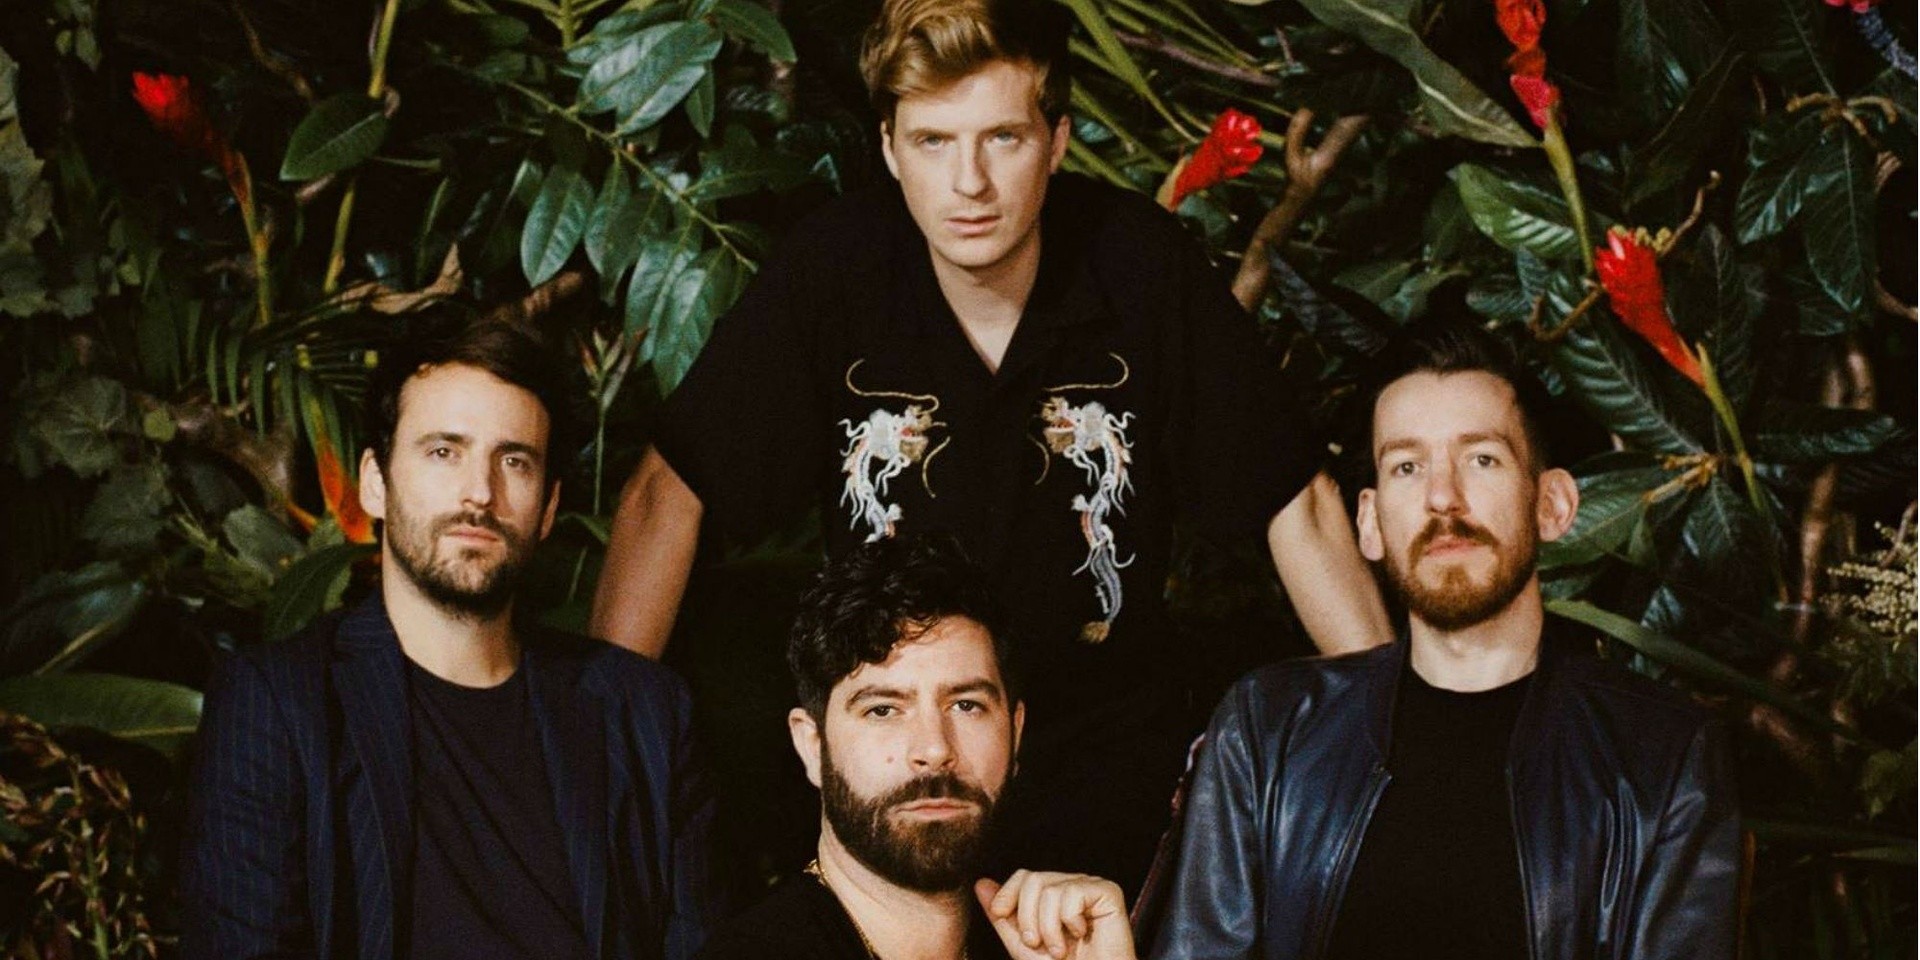 Foals return to form with new track 'Exits' – track review